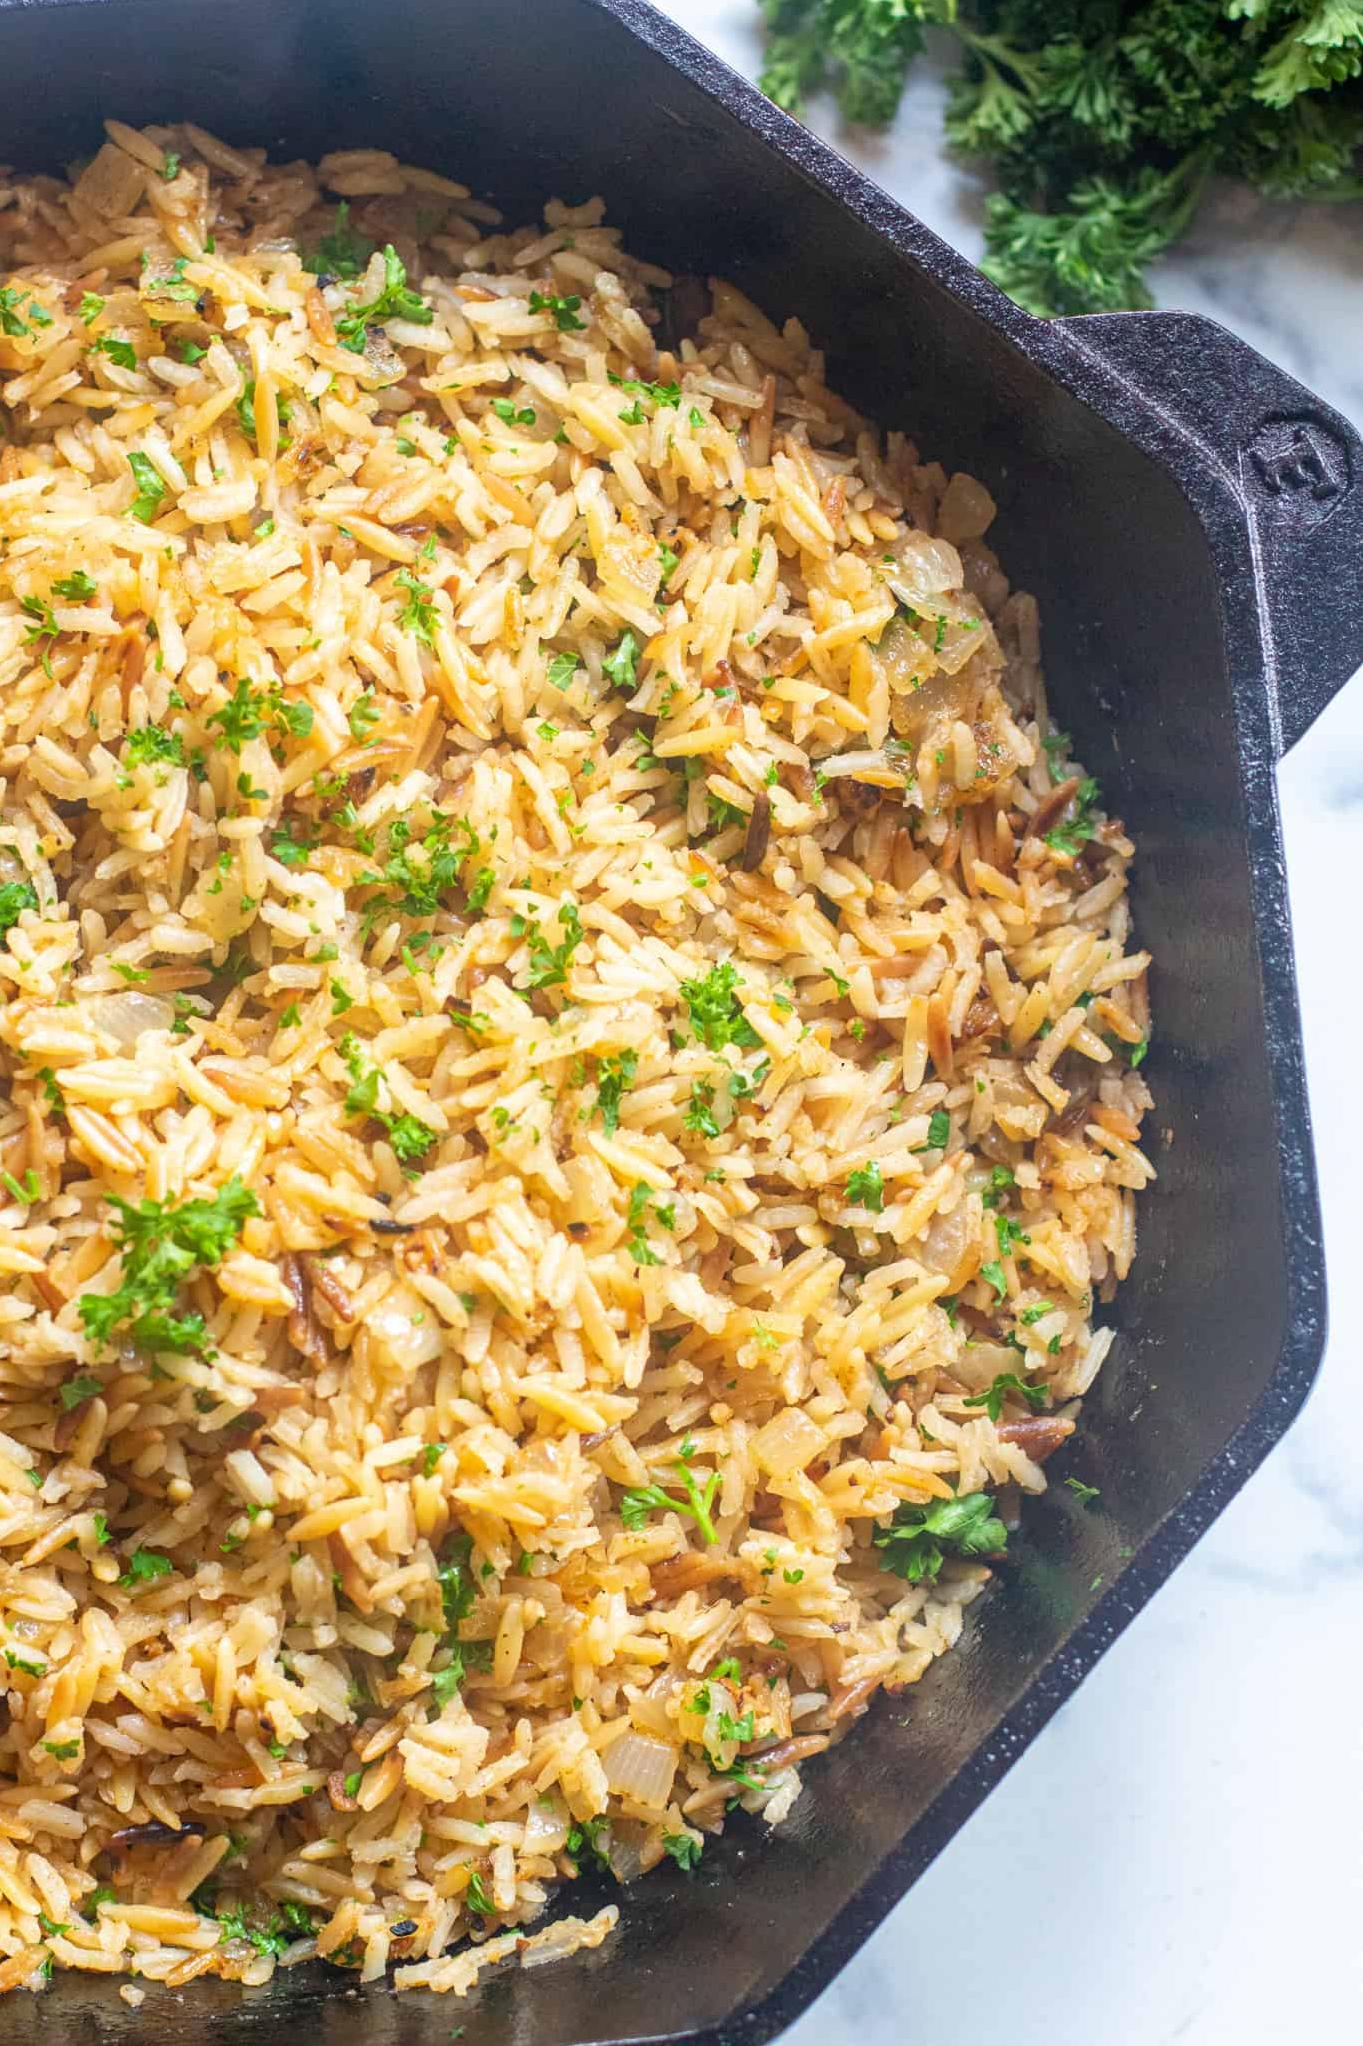  Serve up a taste of the Middle East with this authentic rice pilaf.